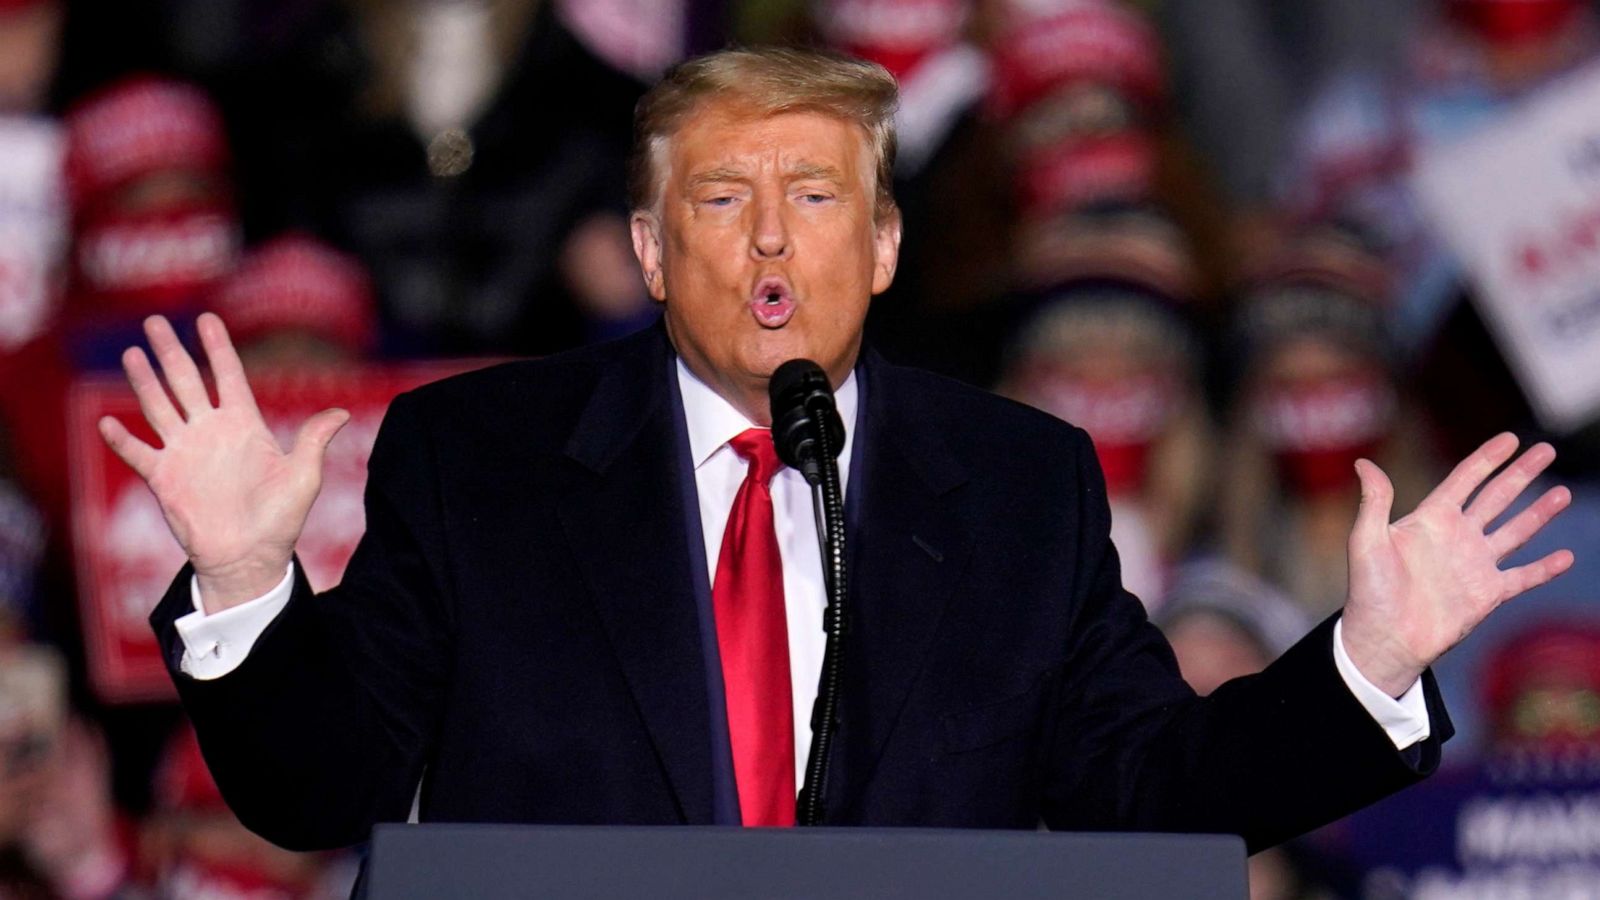 Election 2020 updates: Trump delivers shorter-than-usual speech in chilly Pennsylvania